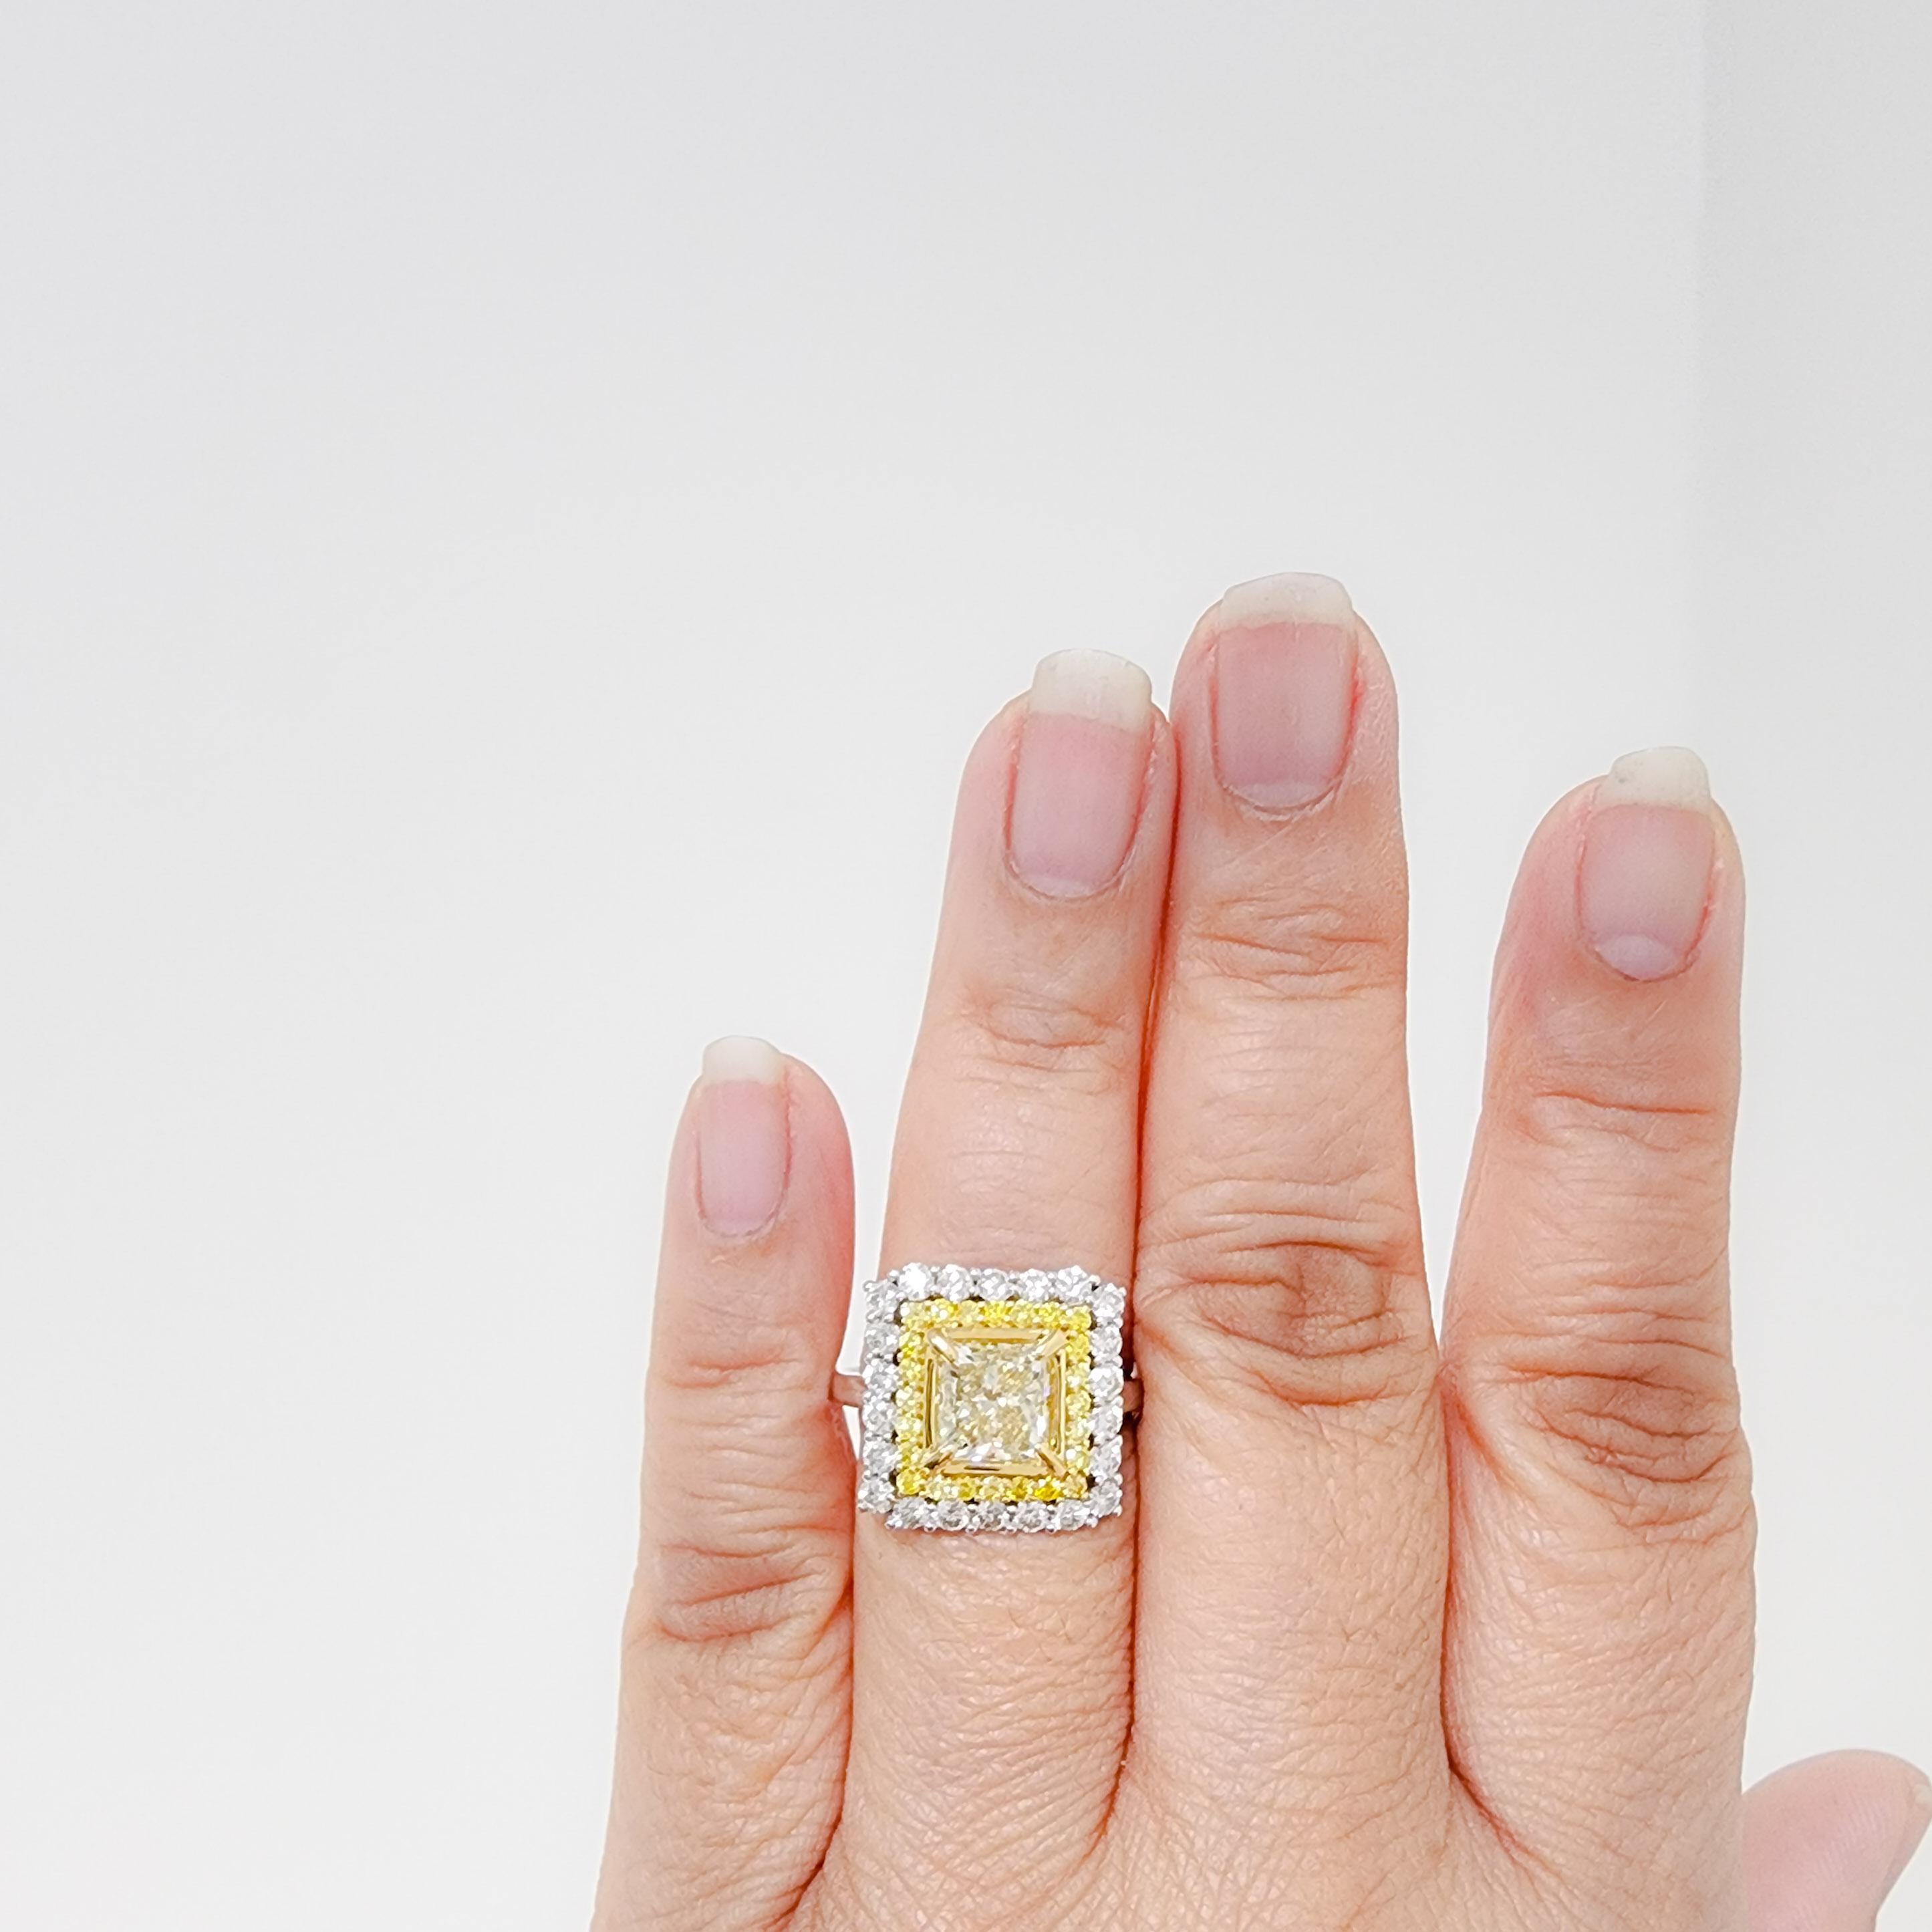 Beautiful 2.50 ct. Y to Z color VS2 clarity diamond princess cut with good quality white diamond rounds and natural yellow diamond rounds.  Handmade in 18k yellow and white gold.  Ring size 10.
GIA certificate included.